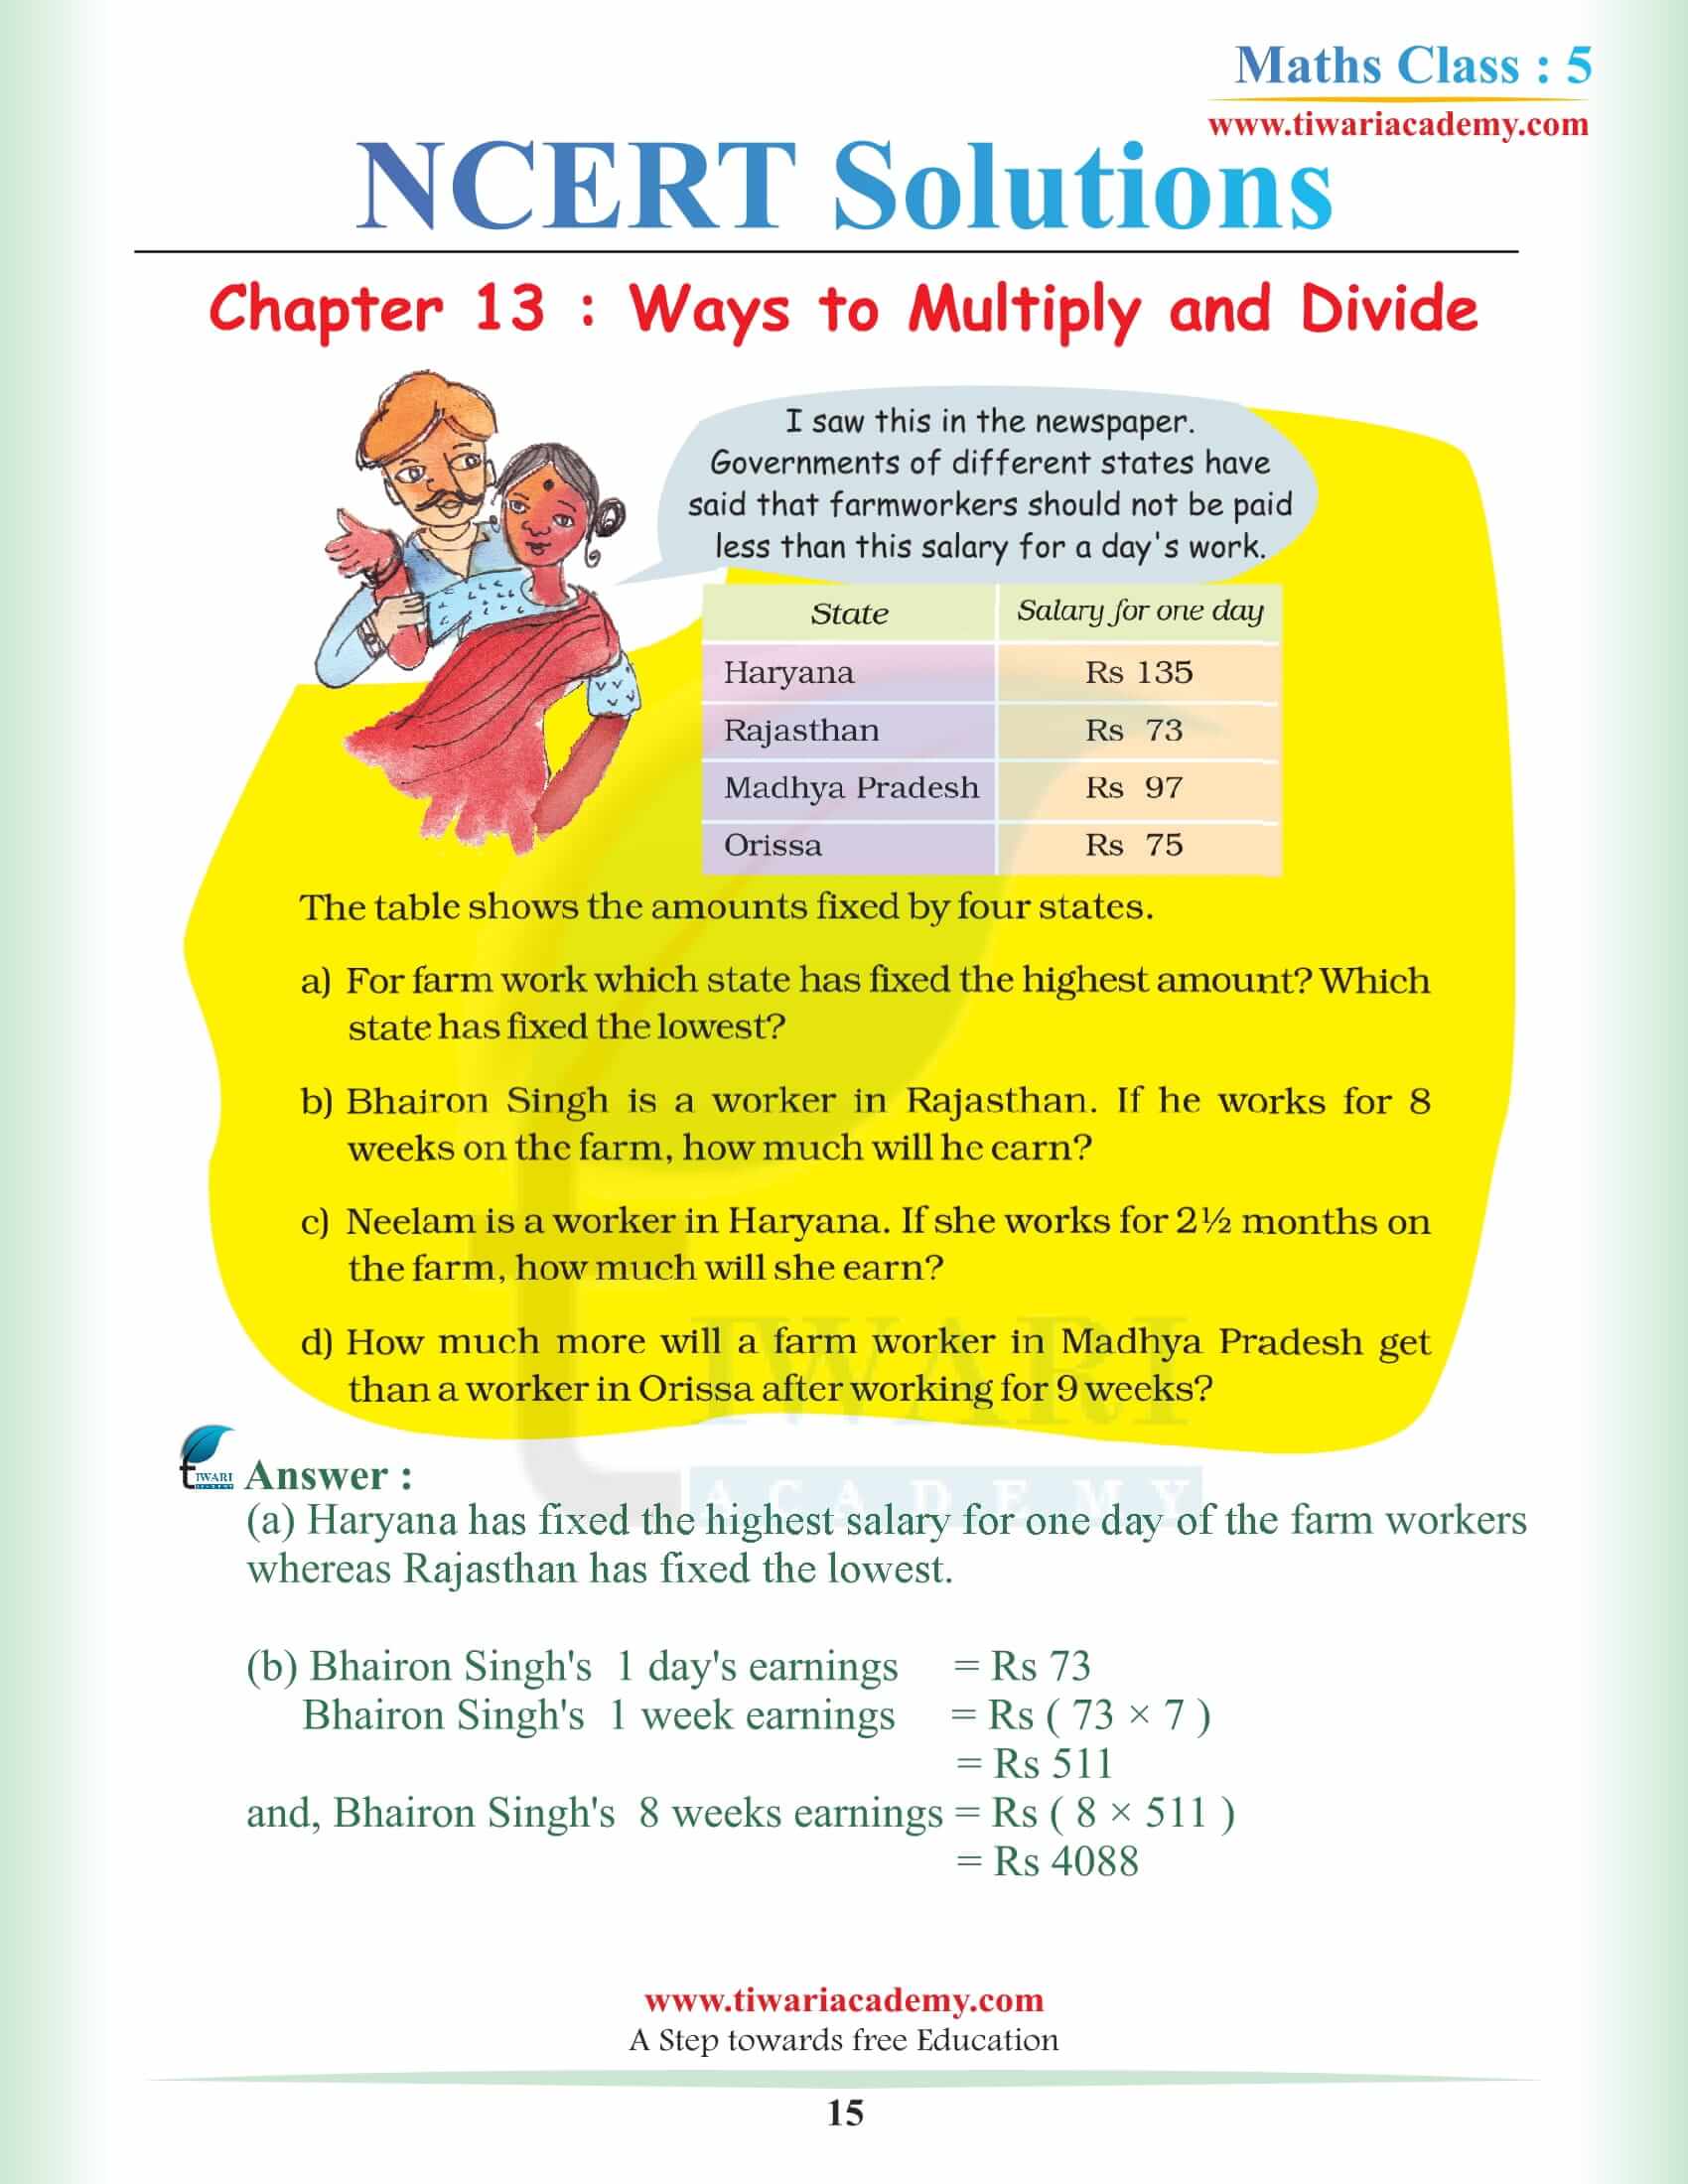 Class 5 Math Magic NCERT Chapter 13 solutions in PDF